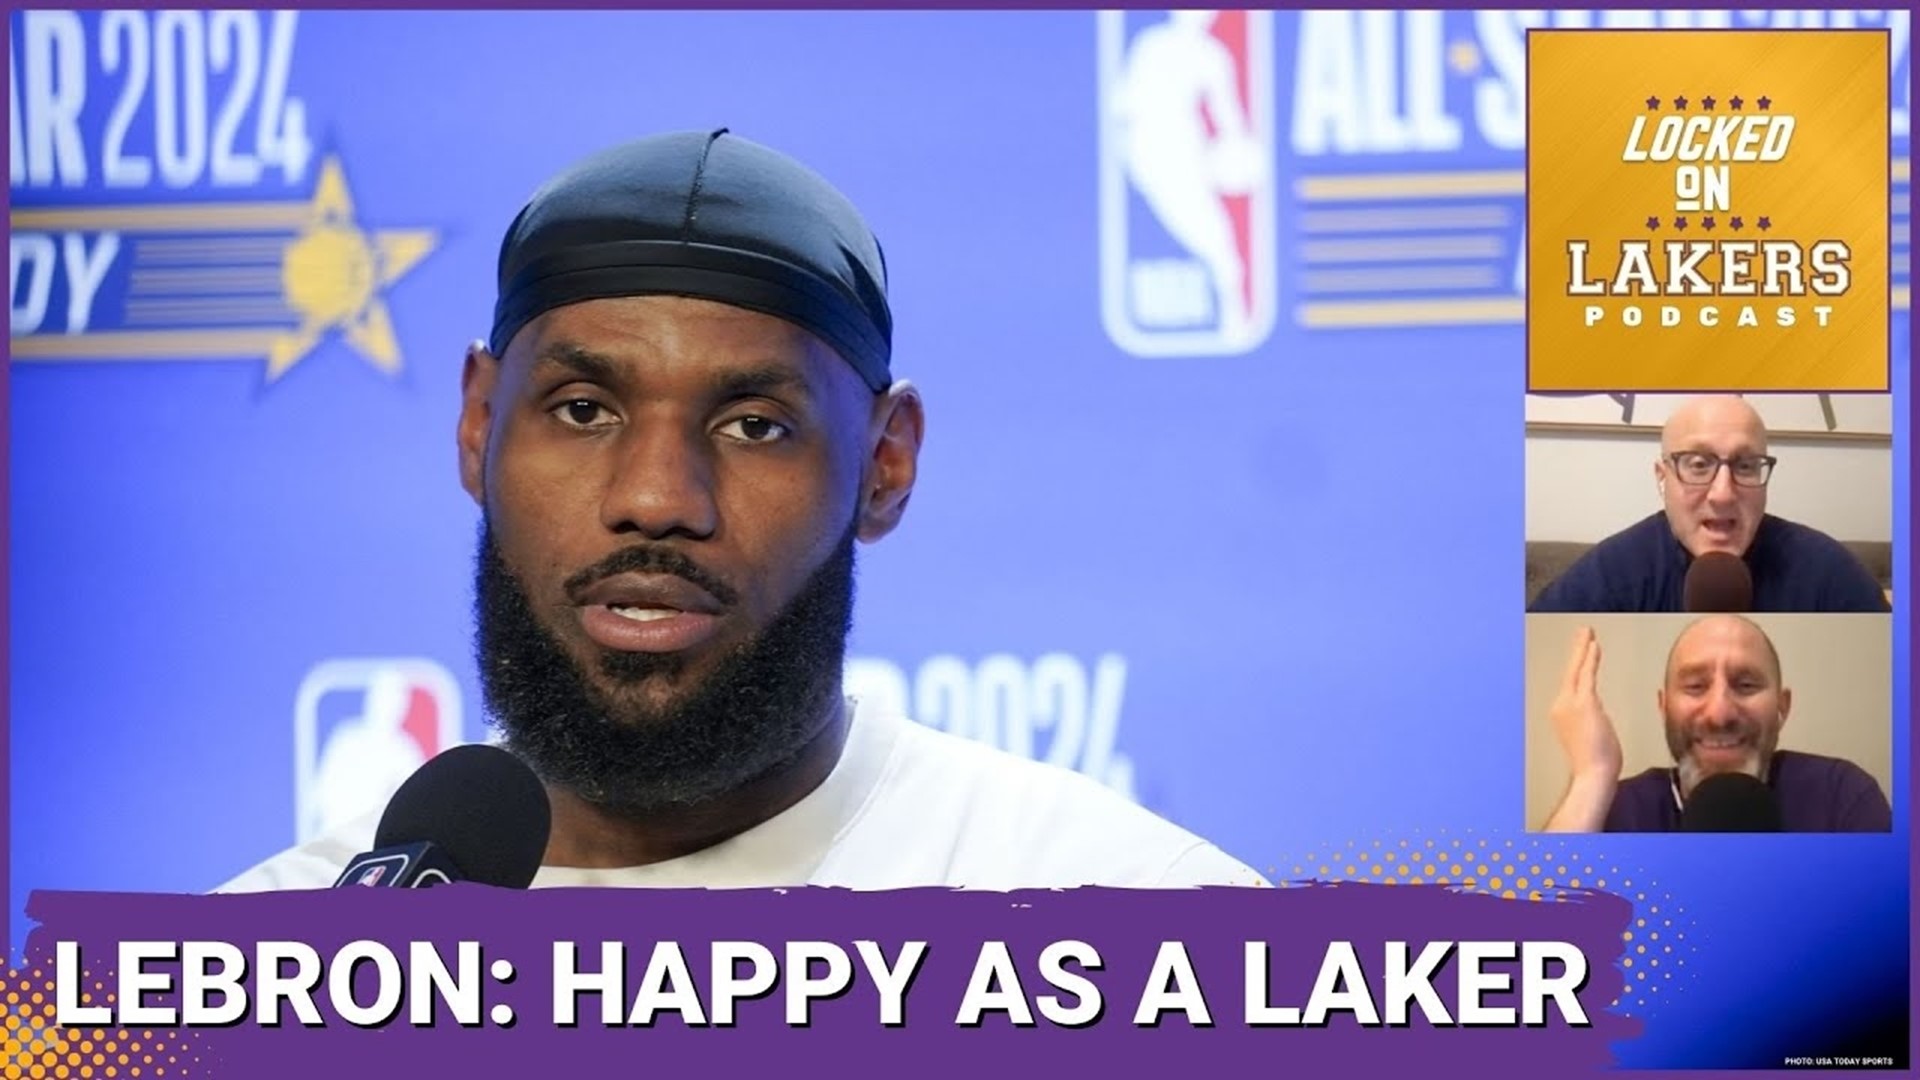 Talking to the media ahead of the All-Star game, James made it clear that he's happy in L.A. and happy being a Laker.